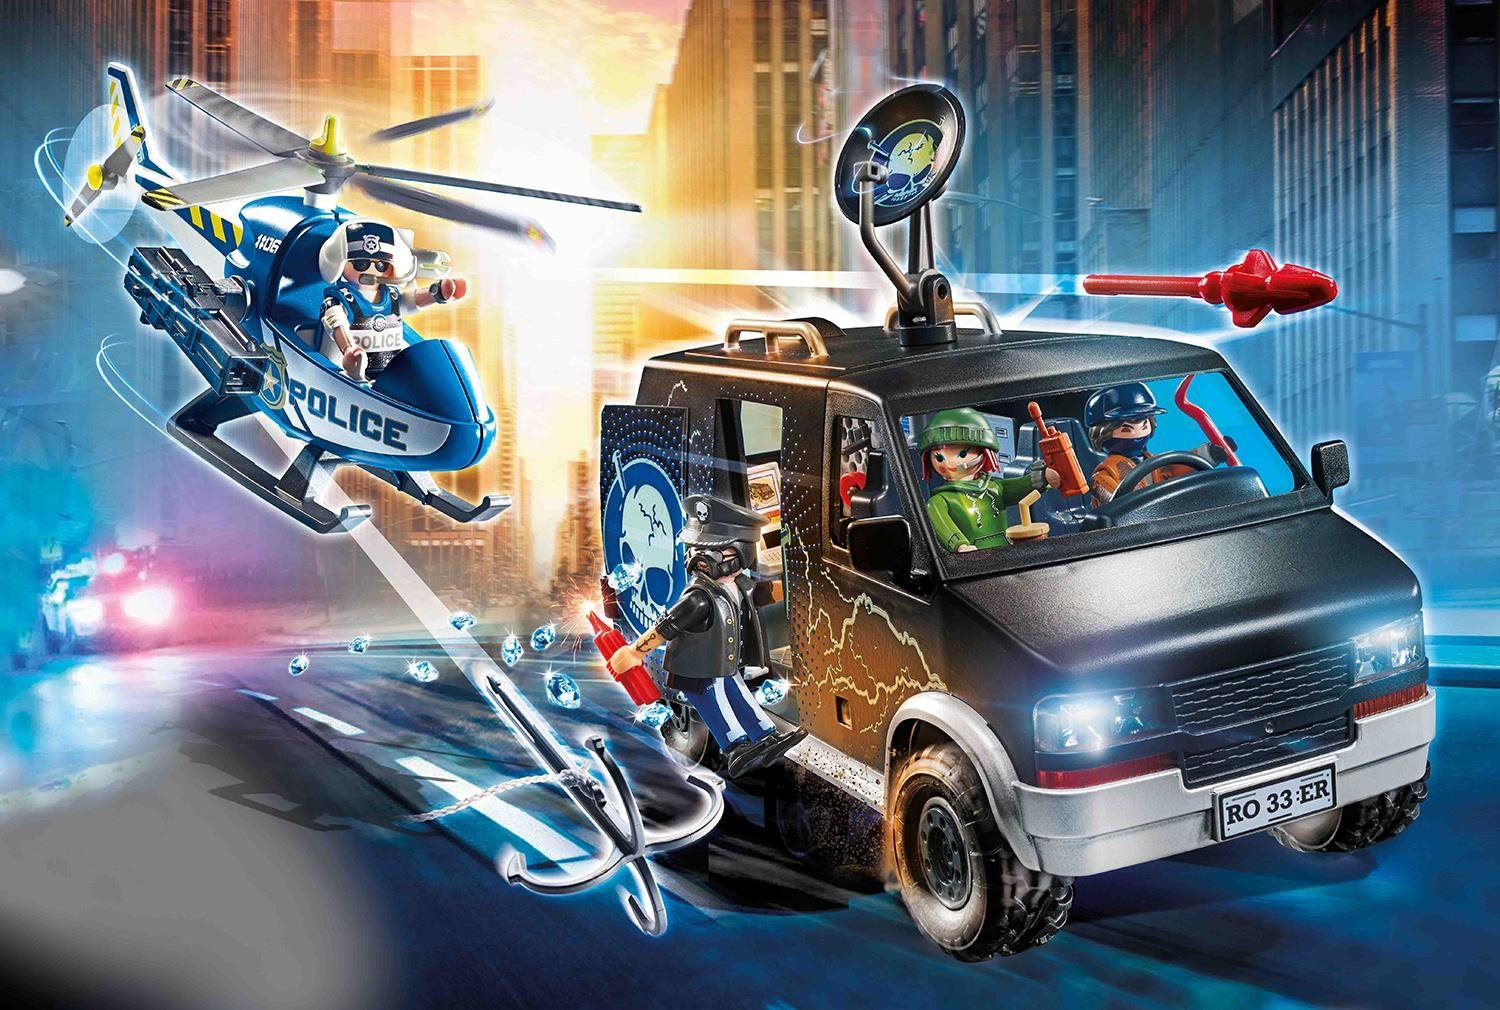 Building Set Playmobil 70575 Police Helicopter: Vehicle Pursuit Lifestyle